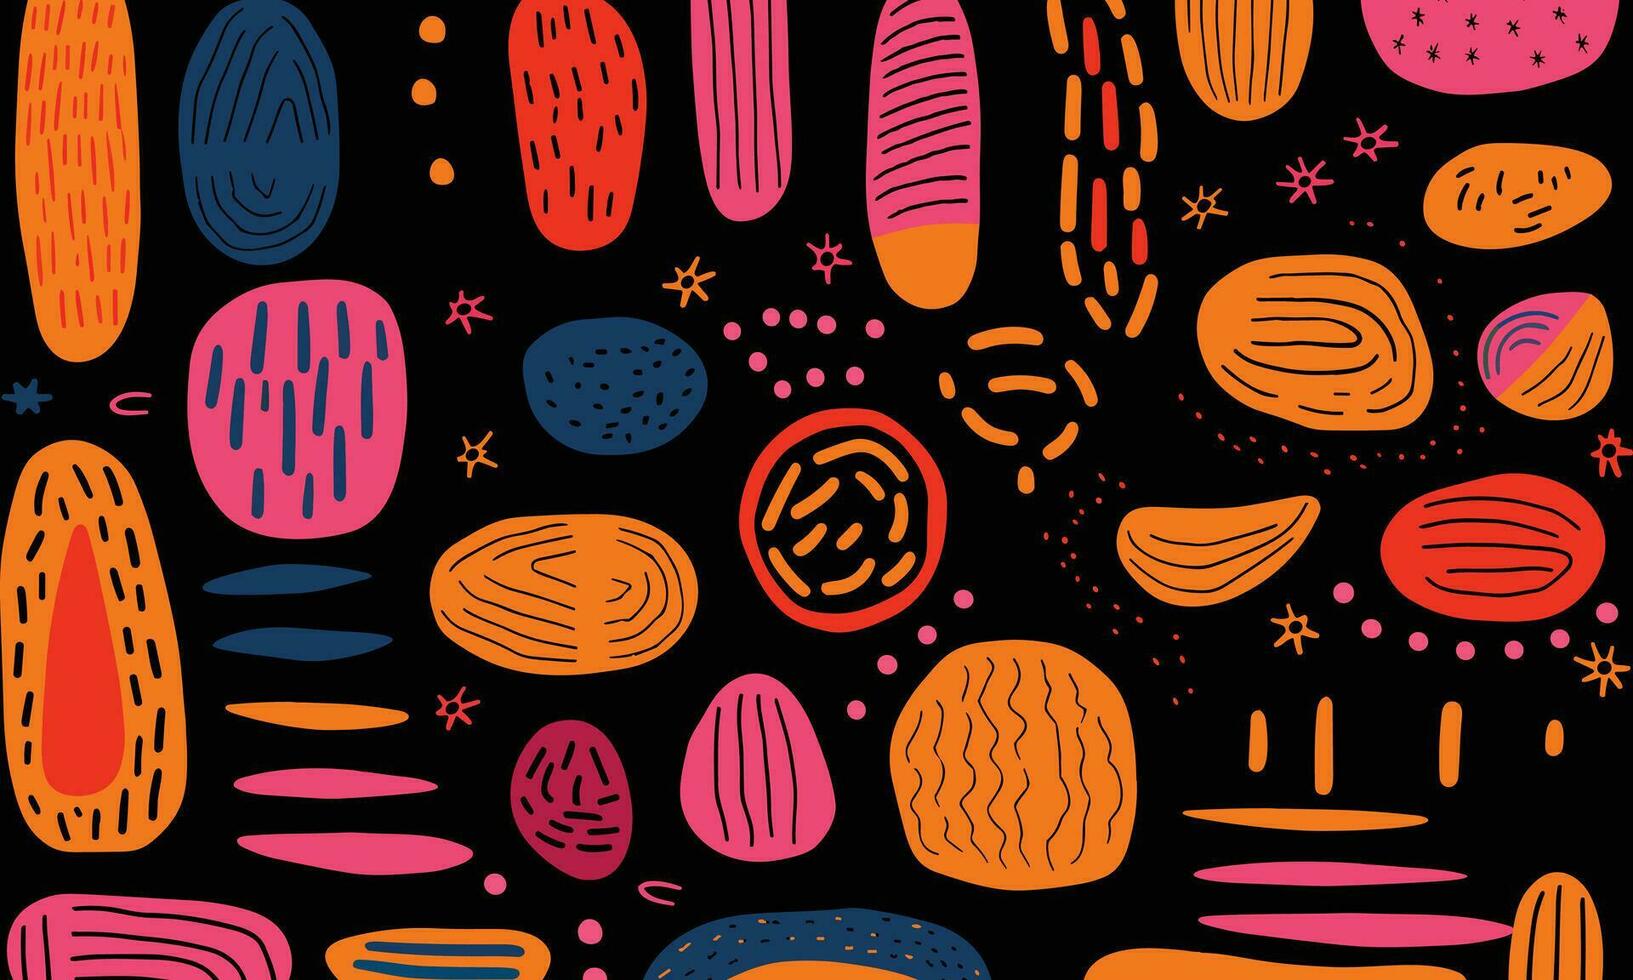 colorful hand drawn abstract pattern, in the style of black background, stripes and shapes, minimalist backgrounds, bold strokes, bright colors, bold shapes, rustic texture, whimsical doodles vector